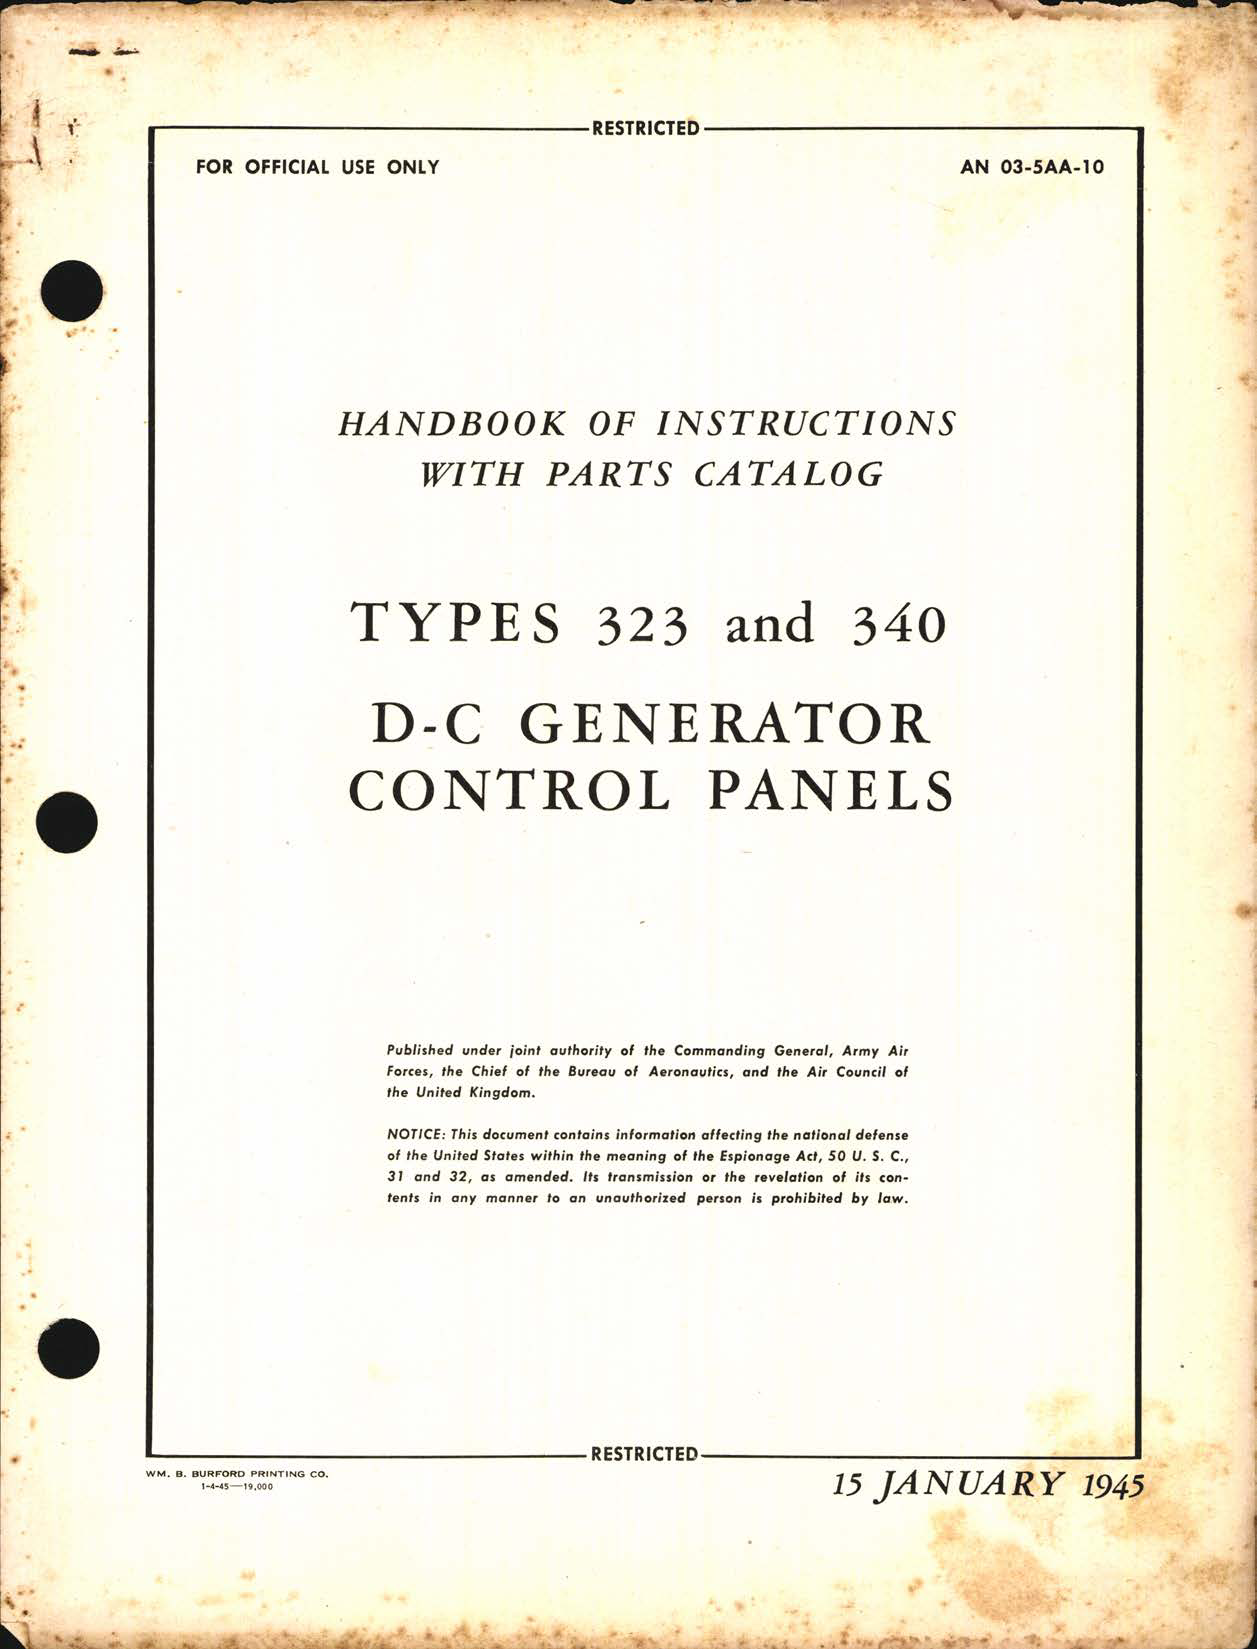 Sample page 1 from AirCorps Library document: Handbook of Instructions with Parts Catalog for Types 323 and 340 D-C Generator Control Panels